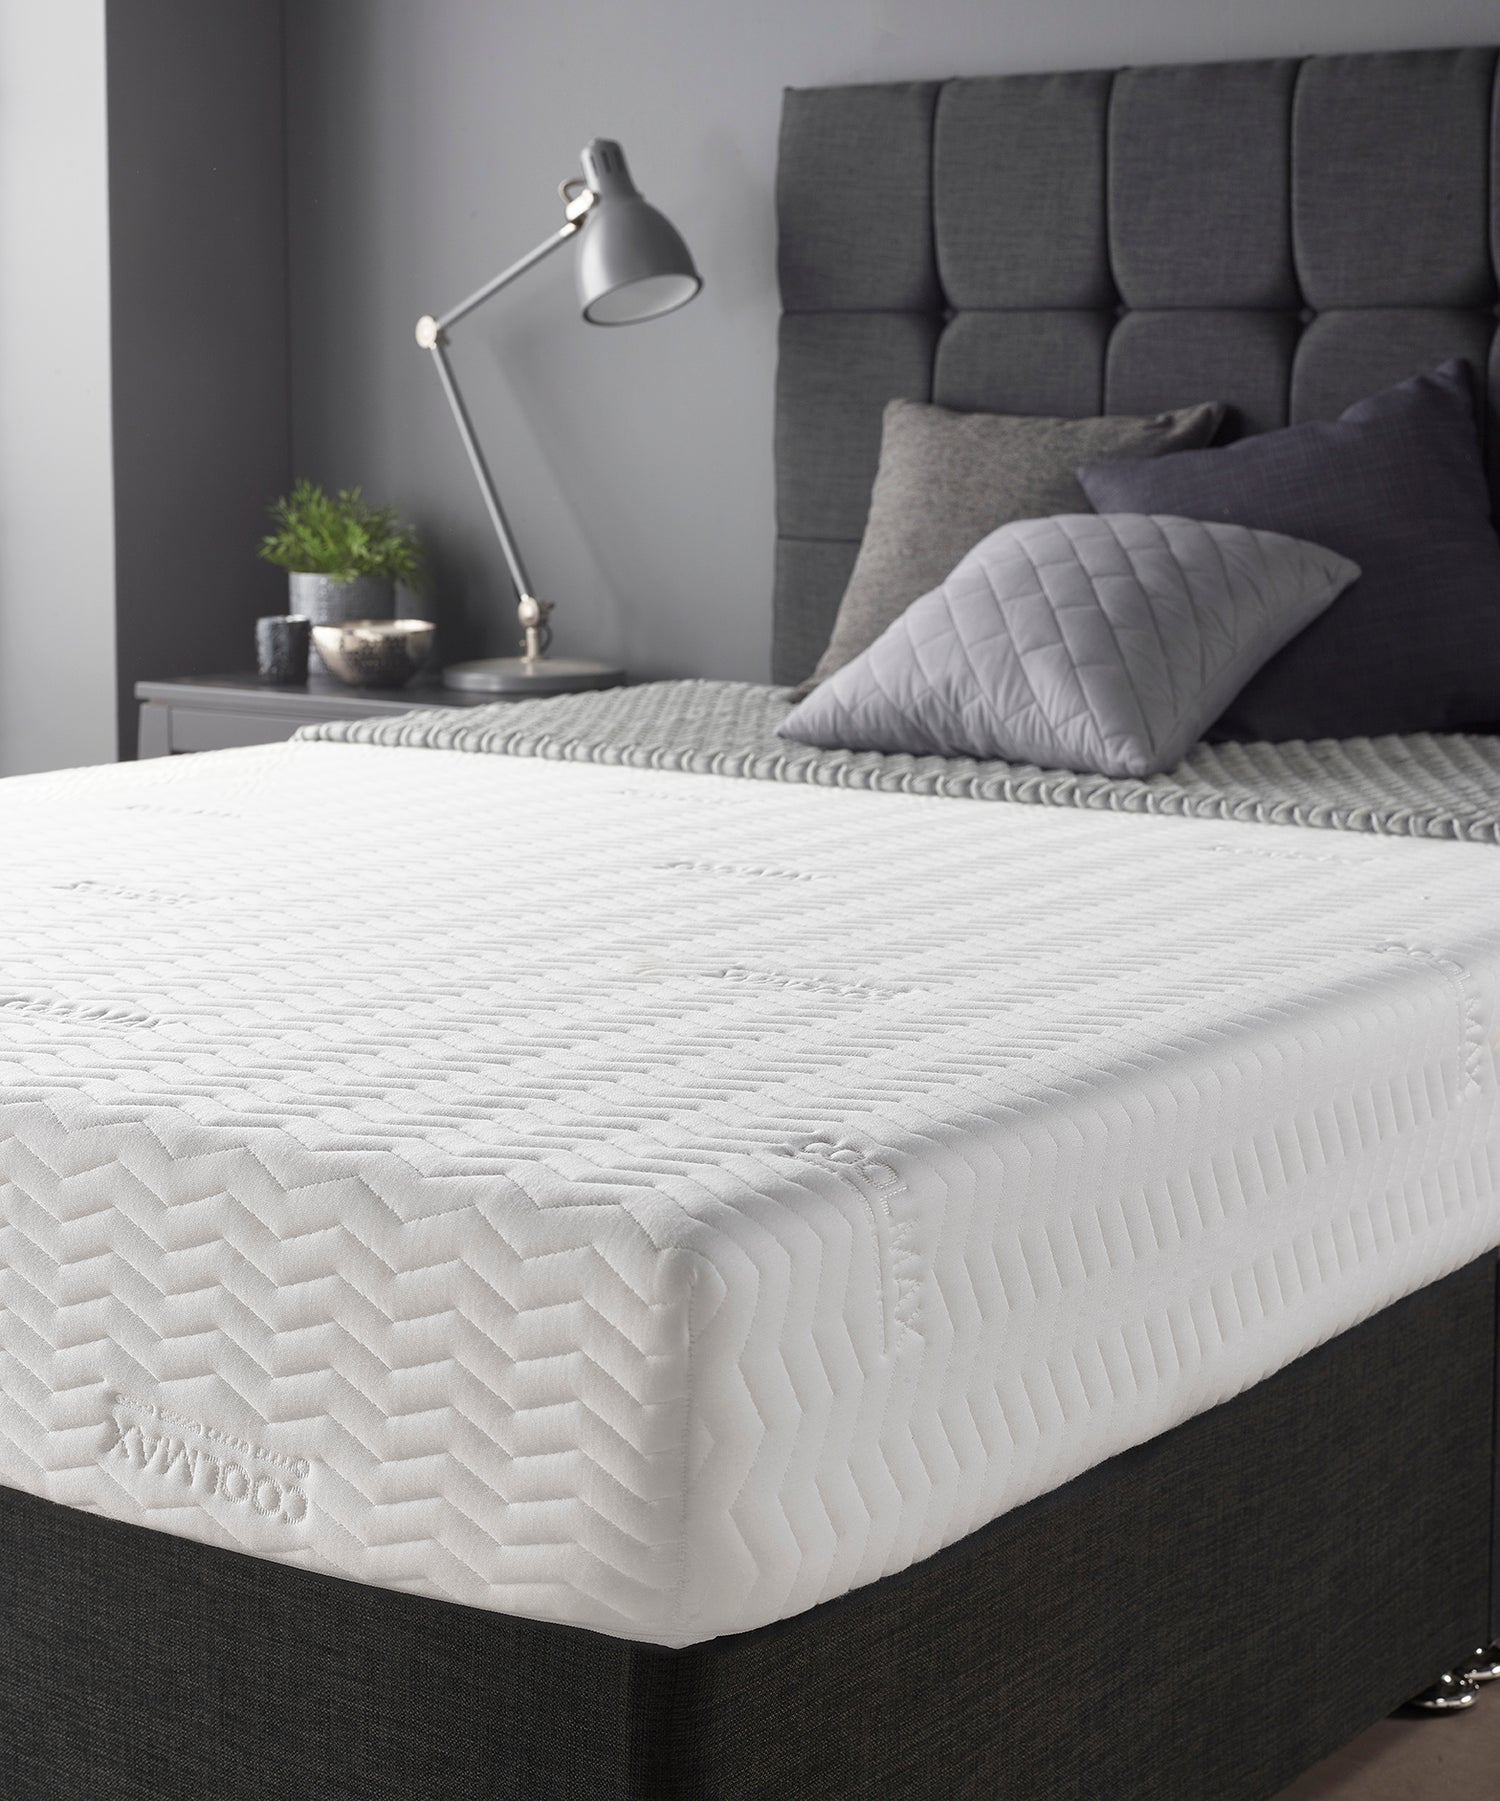 Catherine Lansfield Ortho Relief Mattress